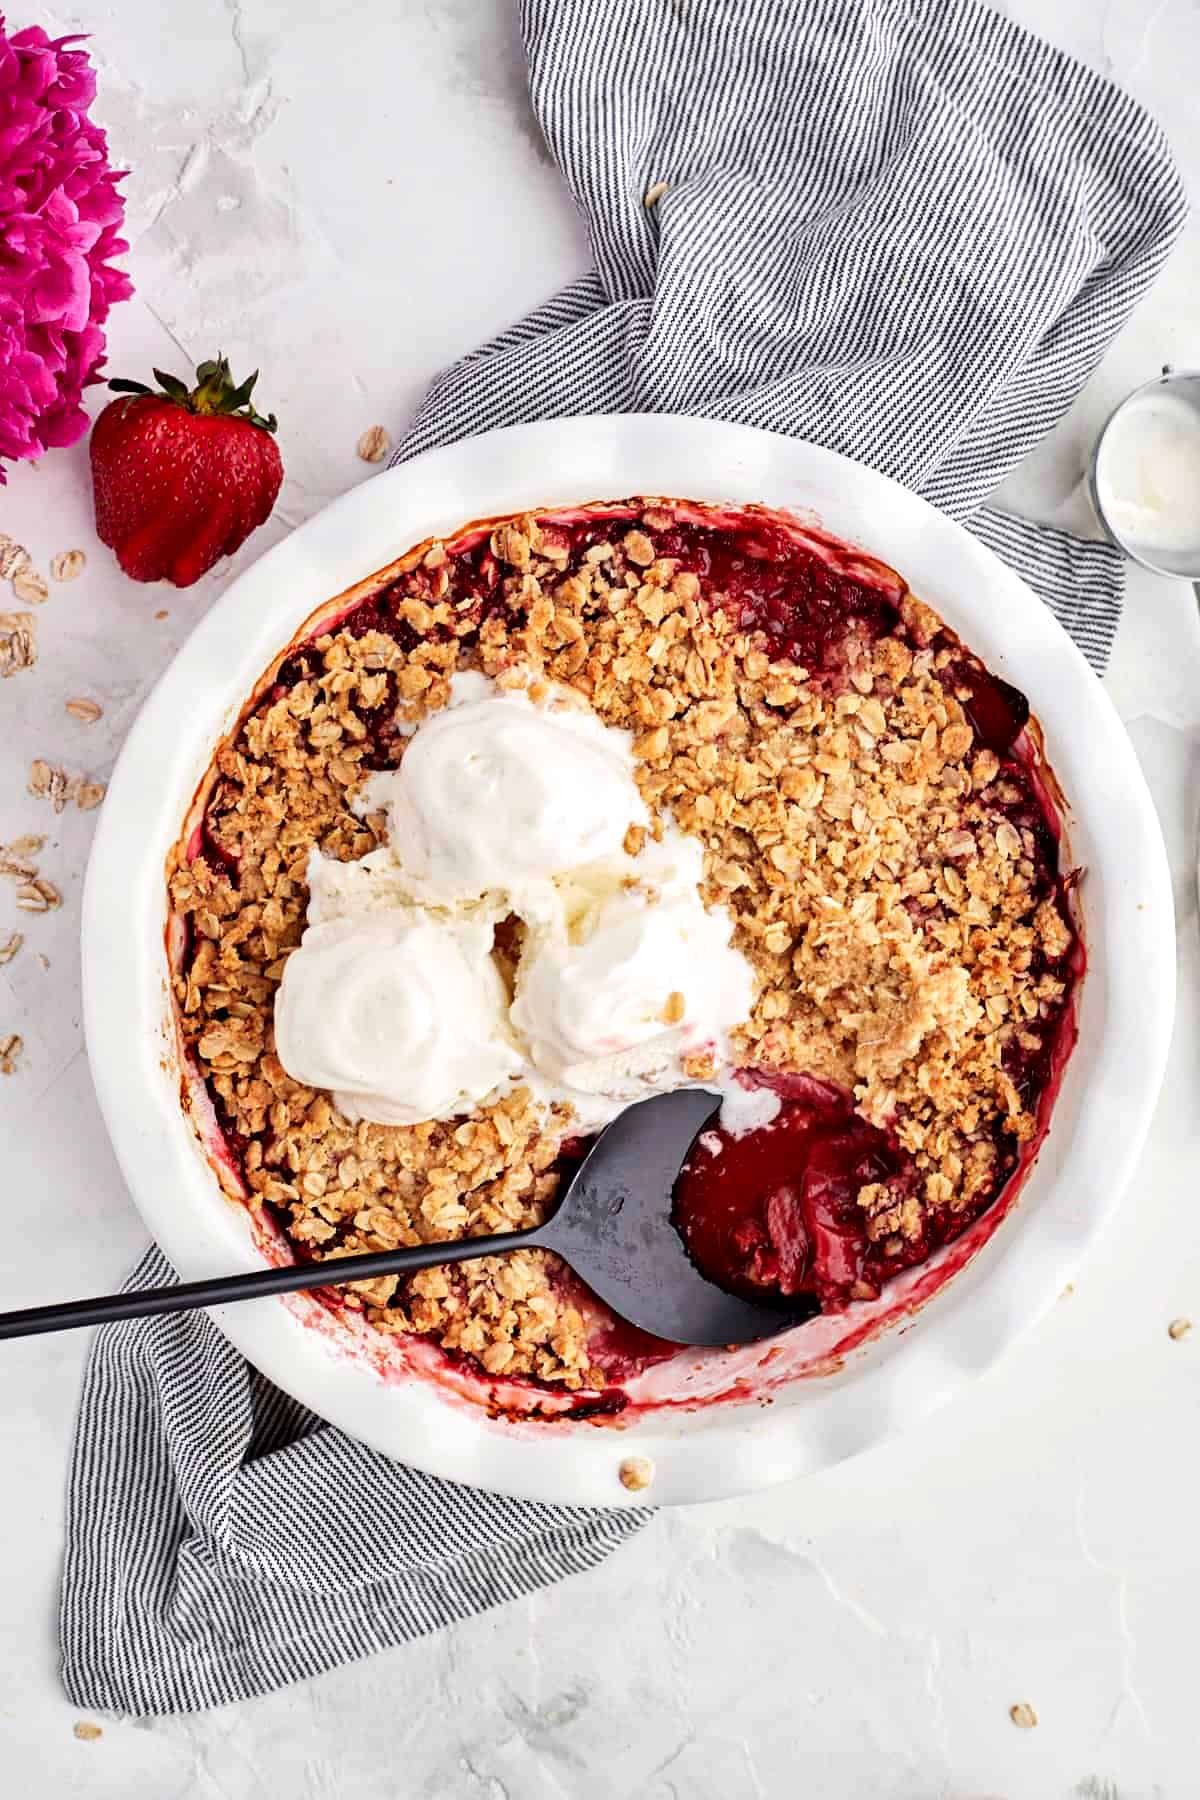 Strawberries in pie dish with oat crumble, ice cream and serving spoon